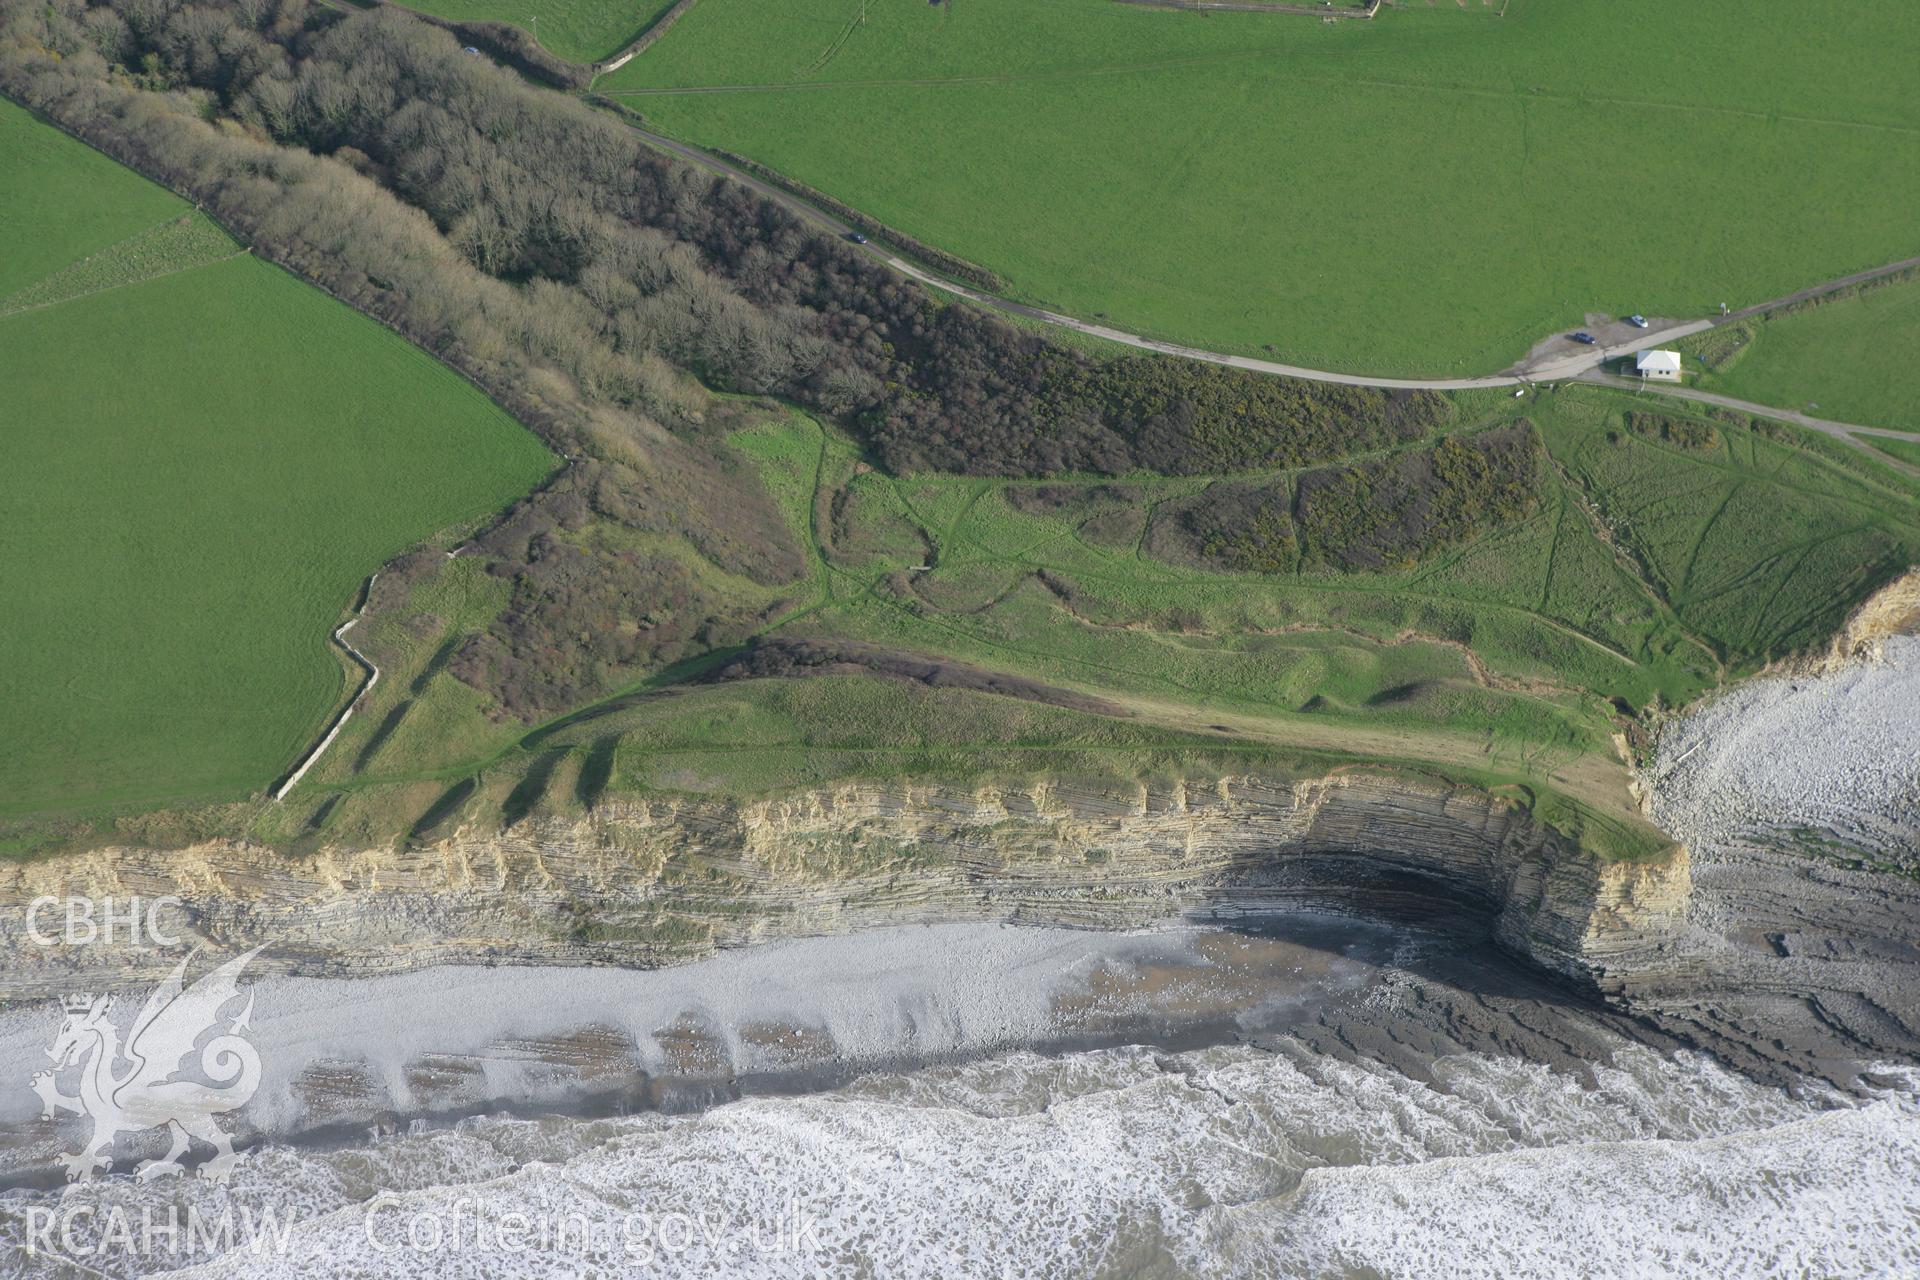 RCAHMW colour oblique photograph of Nash Point Promontory Fort. Taken by Toby Driver on 17/11/2011.